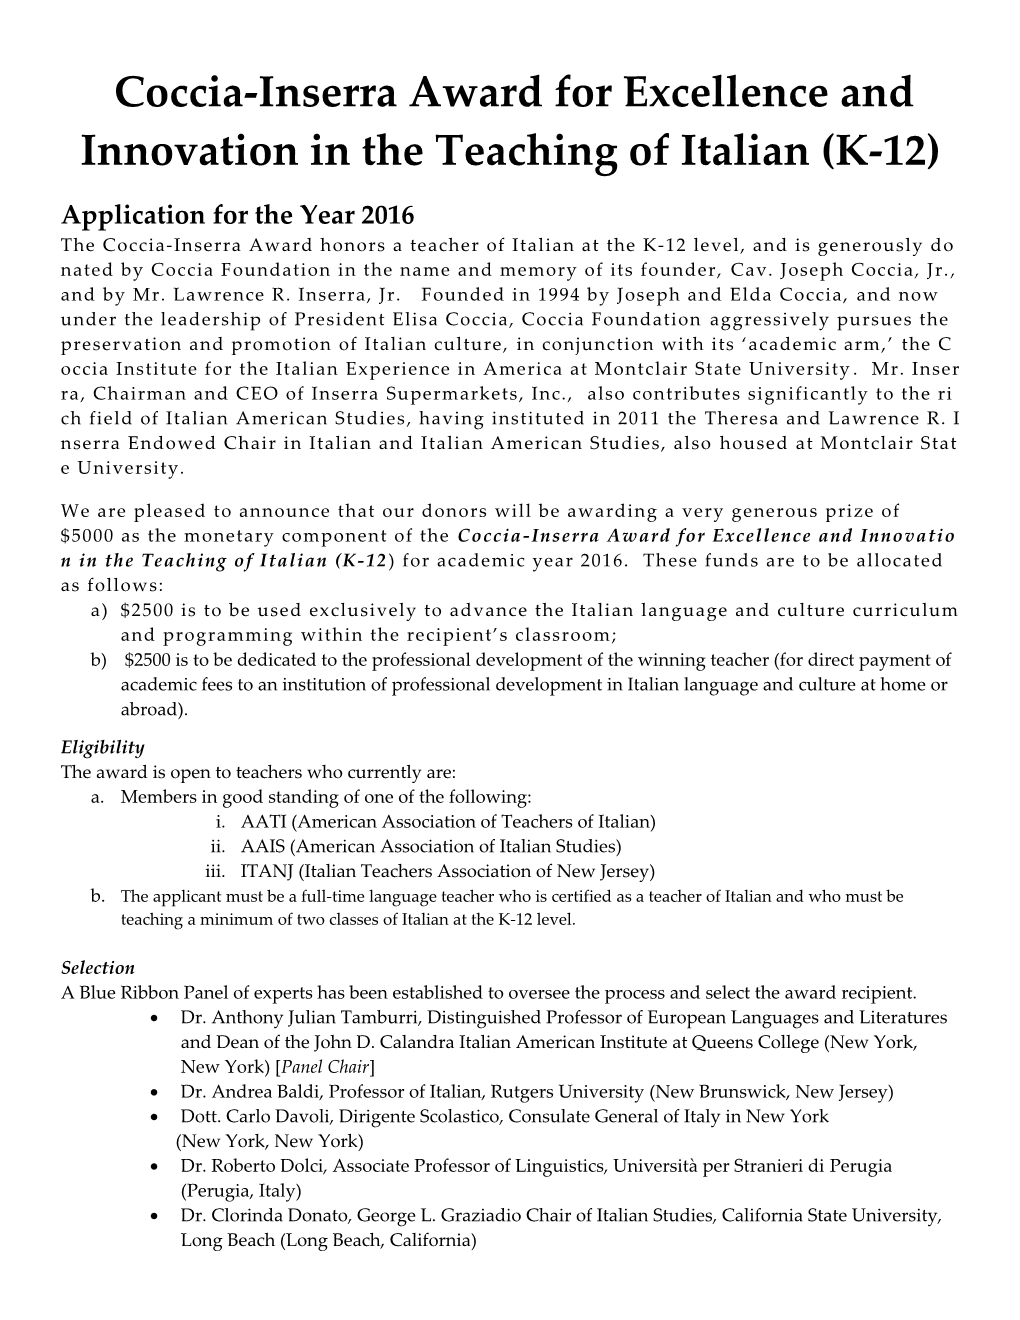 Coccia-Inserra Award for Excellence and Innovation in the Teaching of Italian (K-12)